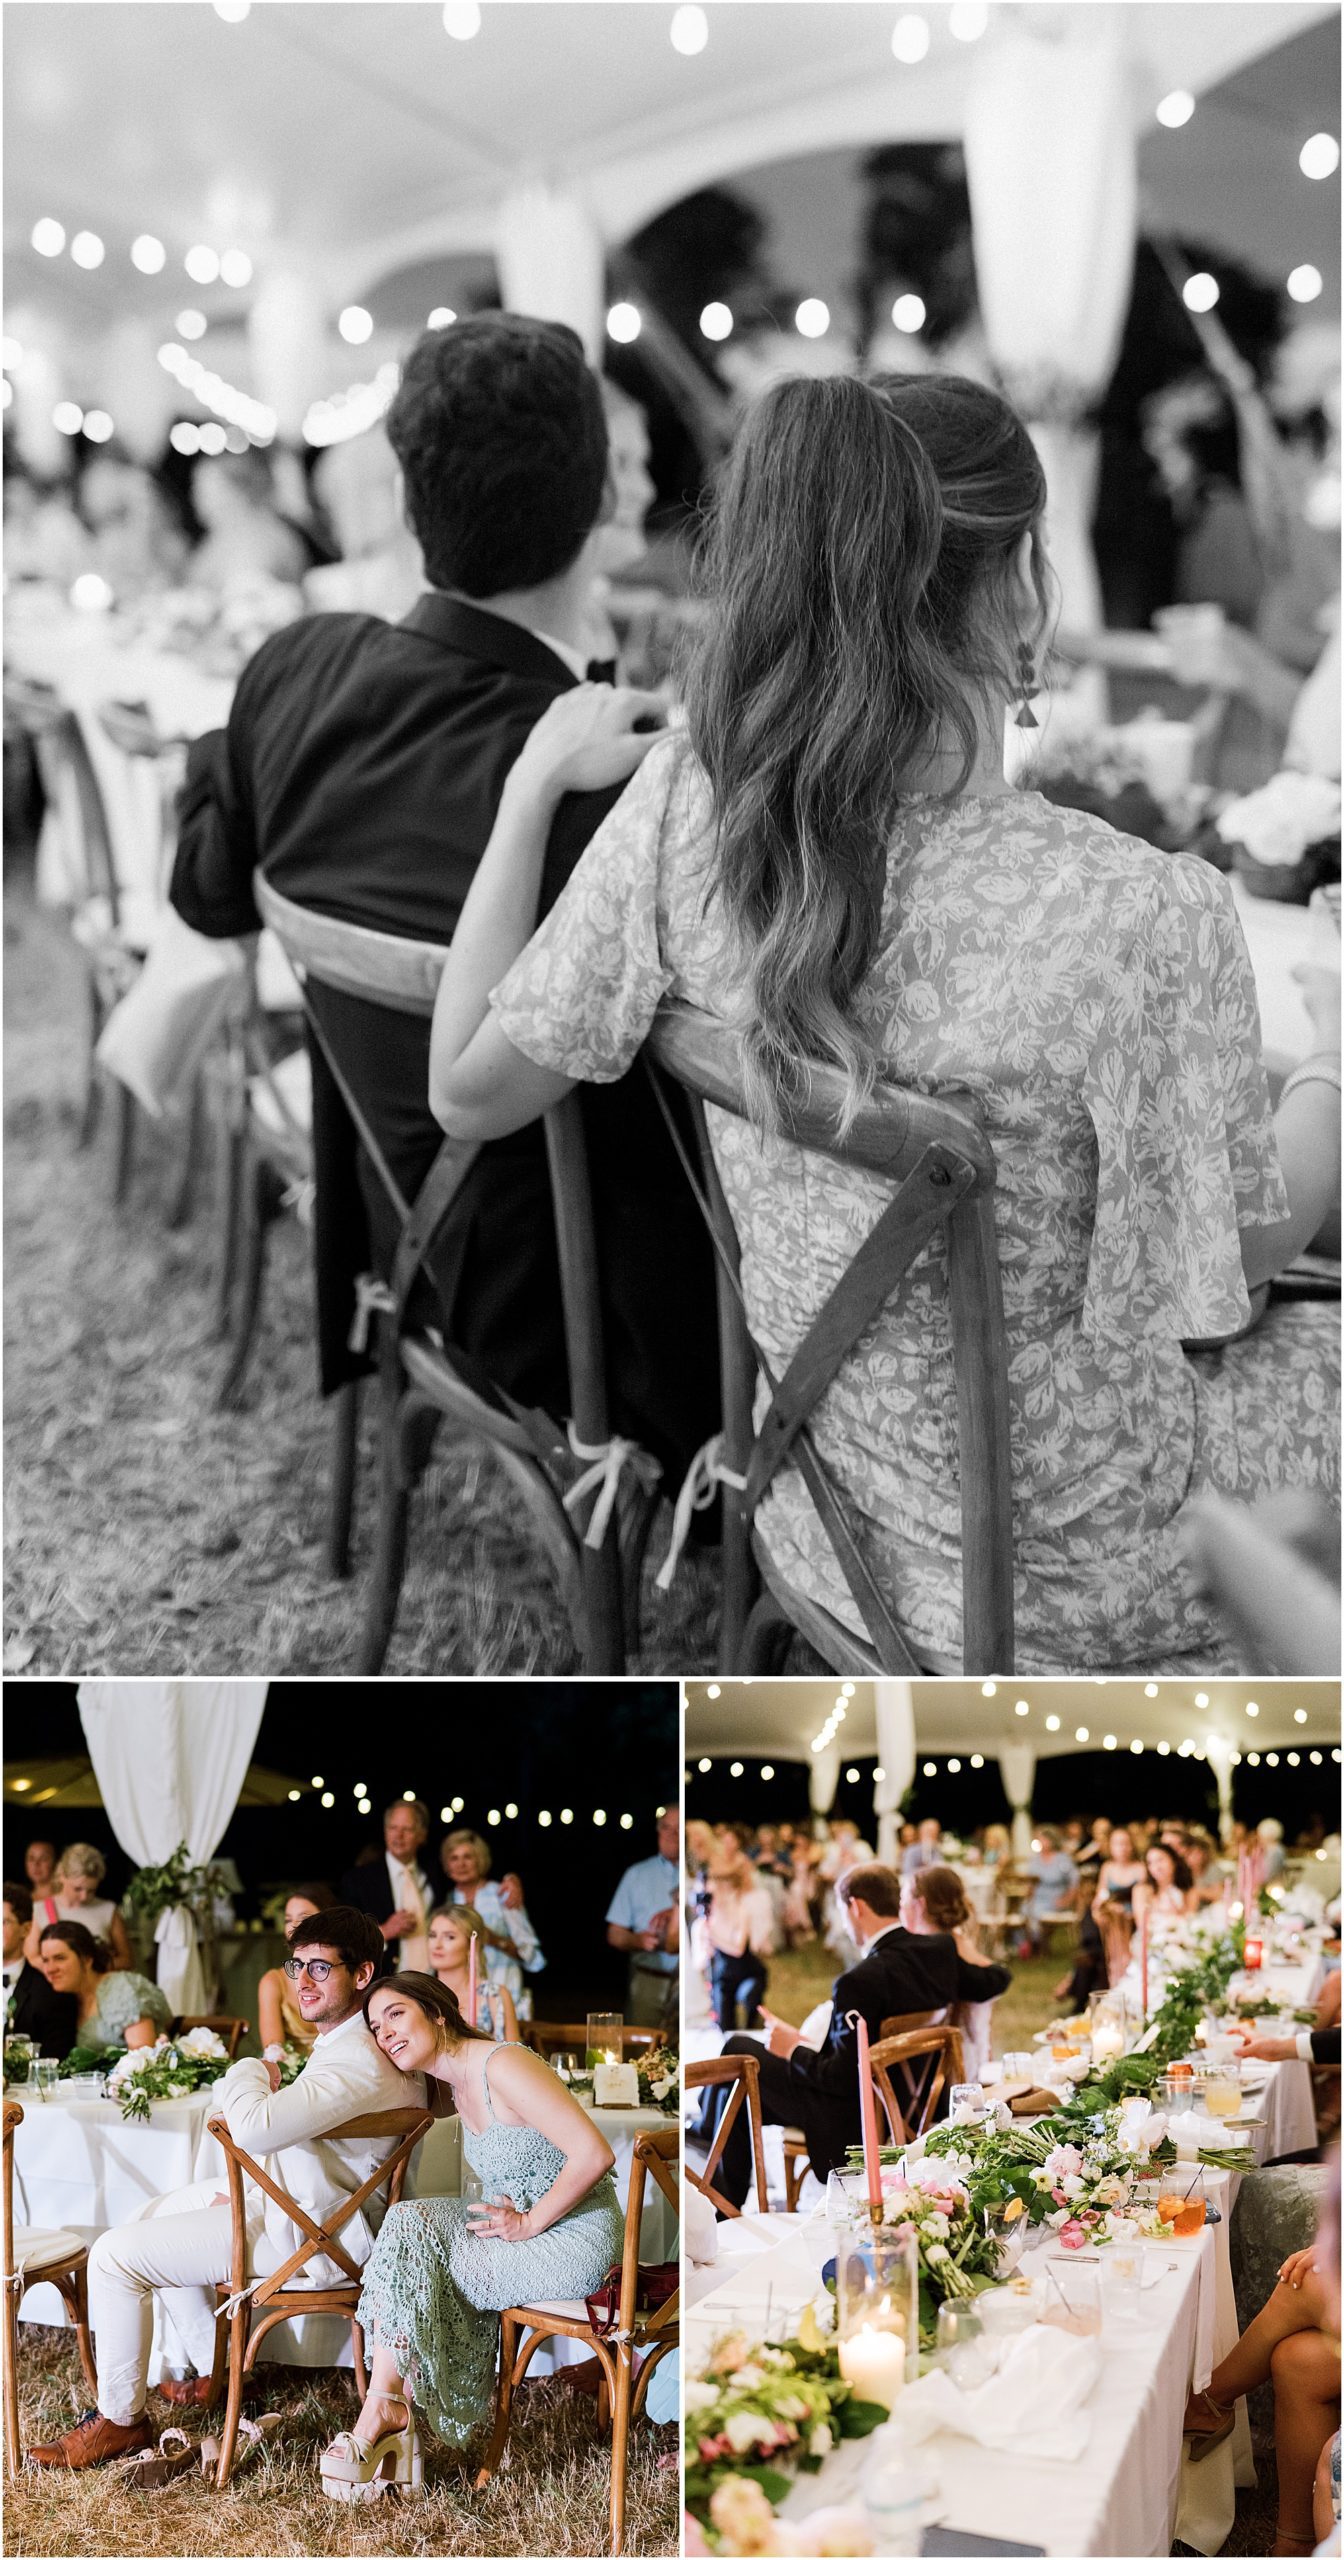 Candid wedding reception moments under a white tent.